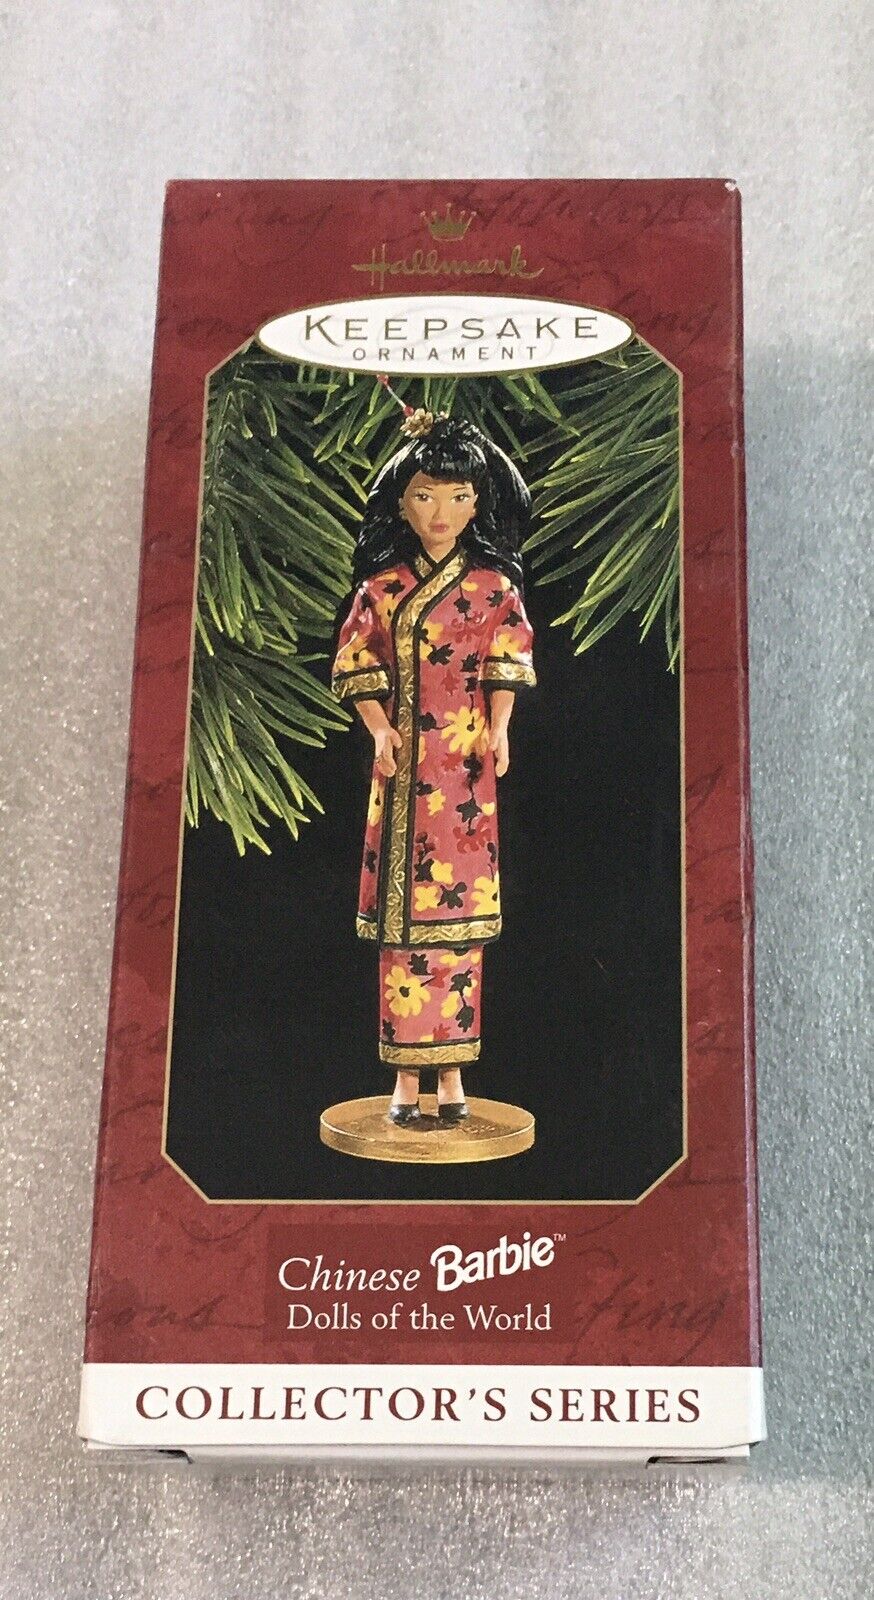 Hallmark Chinese Barbie 1997 Dolls of the World Ornament #2 in Series NEW